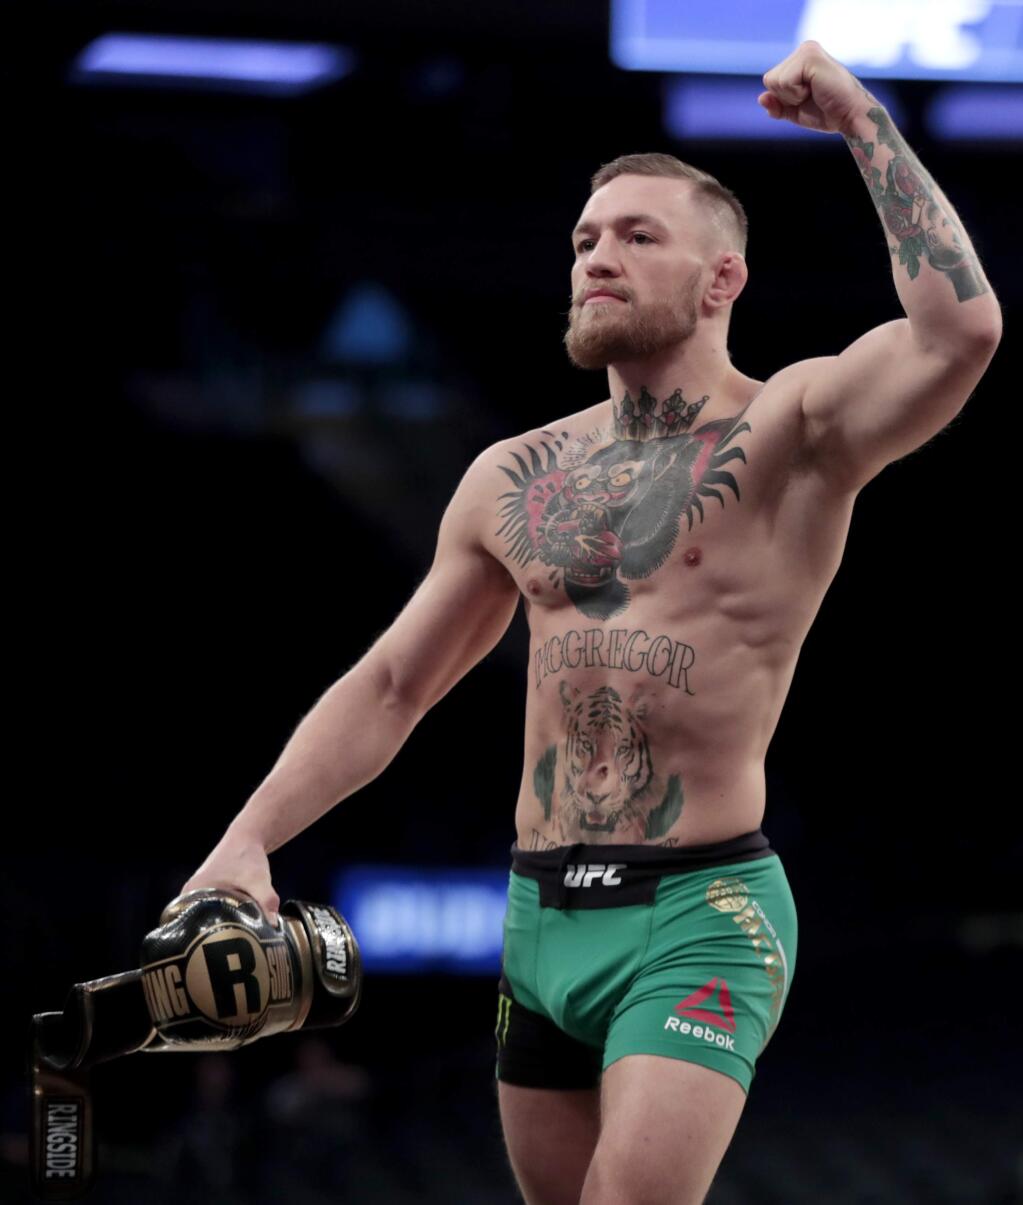 Conor McGregor gestures toward fans while working out ahead of his UFC 205 mixed martial arts bout against Eddie Alvarez Wednesday, Nov. 9, 2016, at Madison Square Garden in New York. (AP Photo/Julio Cortez)